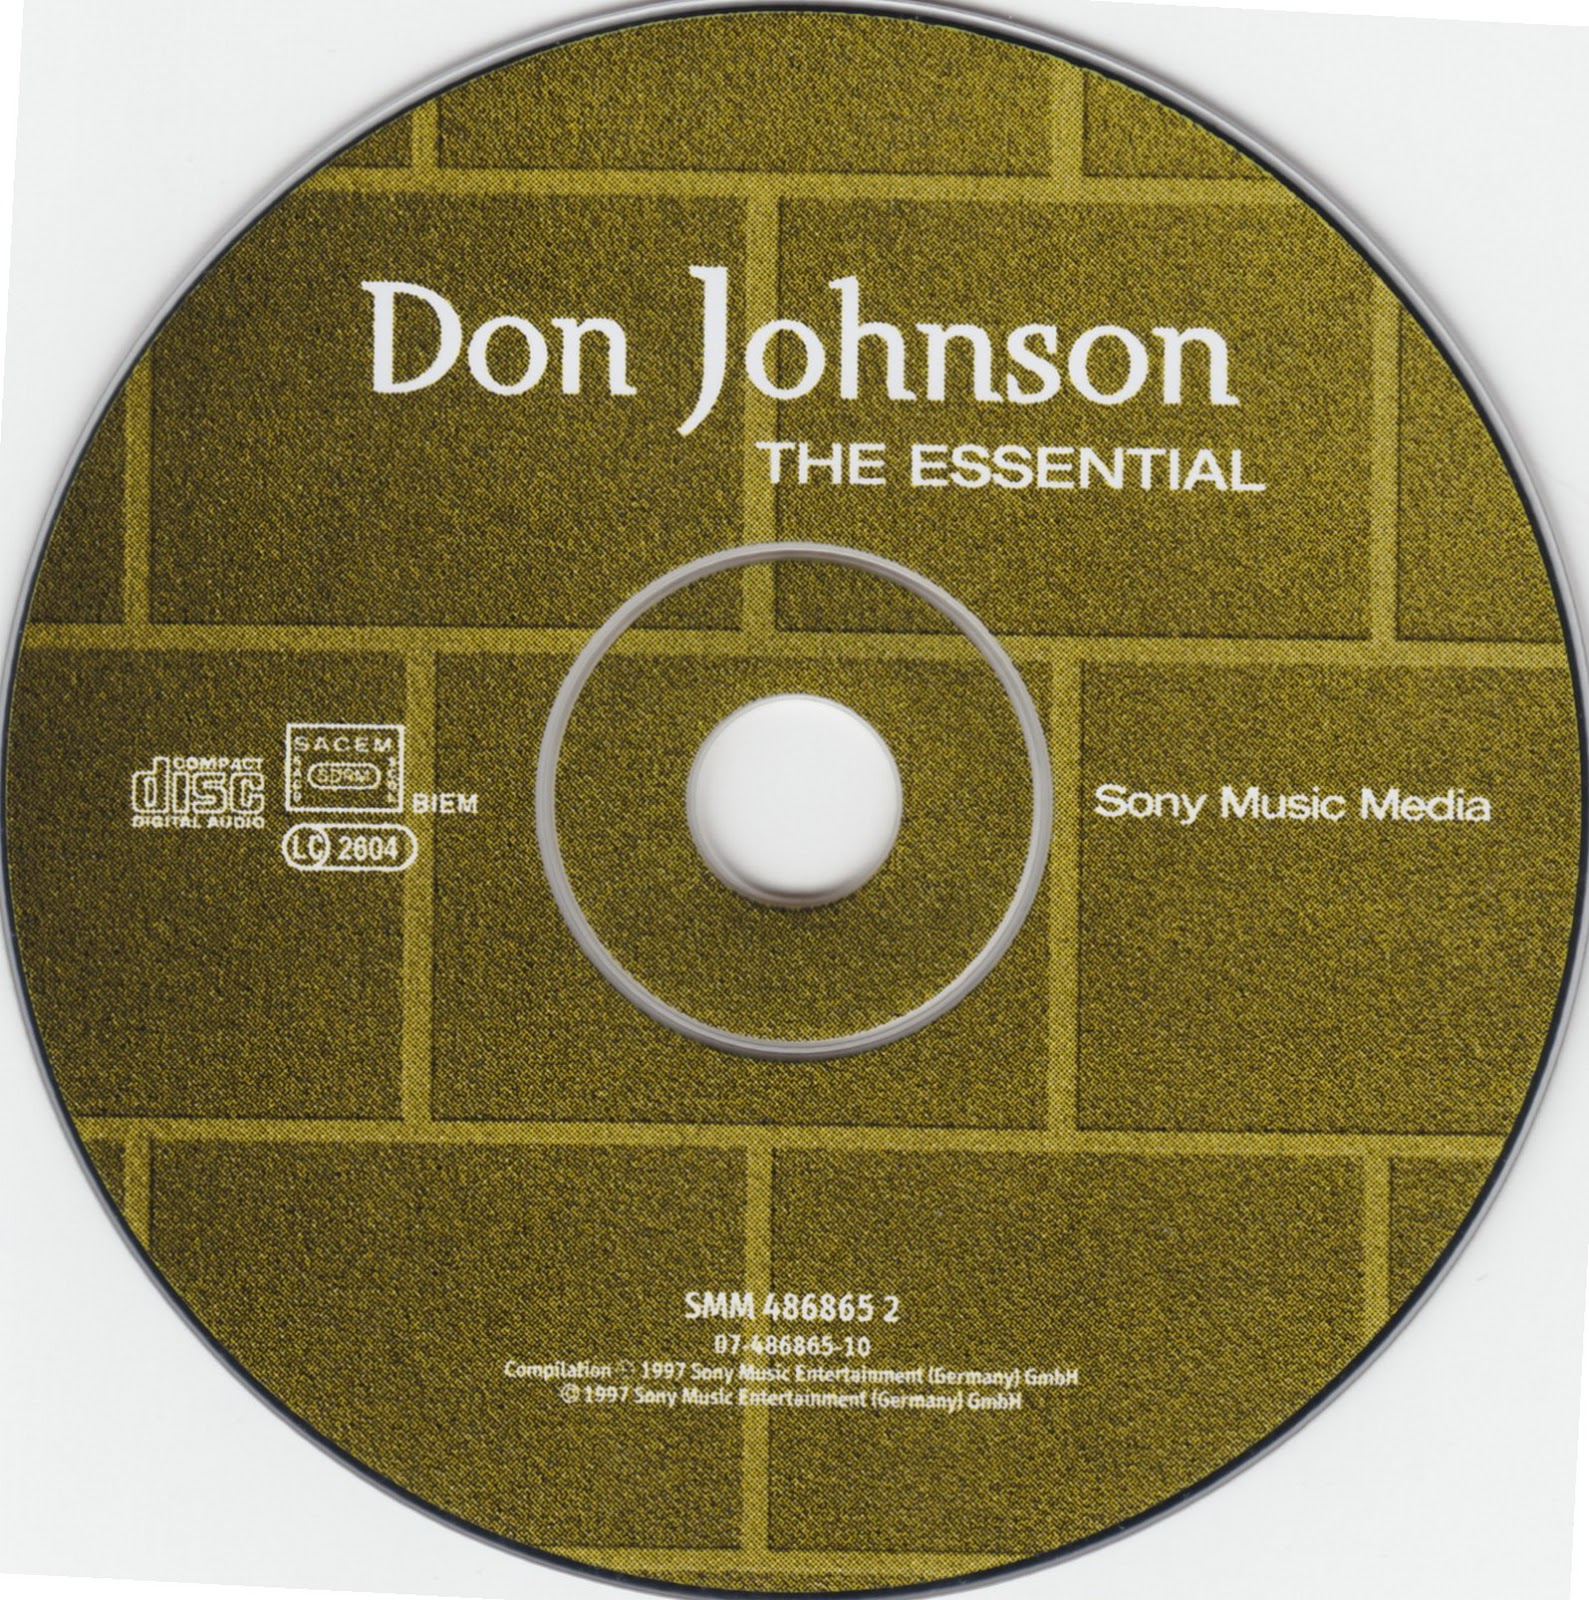 Music download blogspot 80s 90s DON JOHNSON THE ESSENTIAL